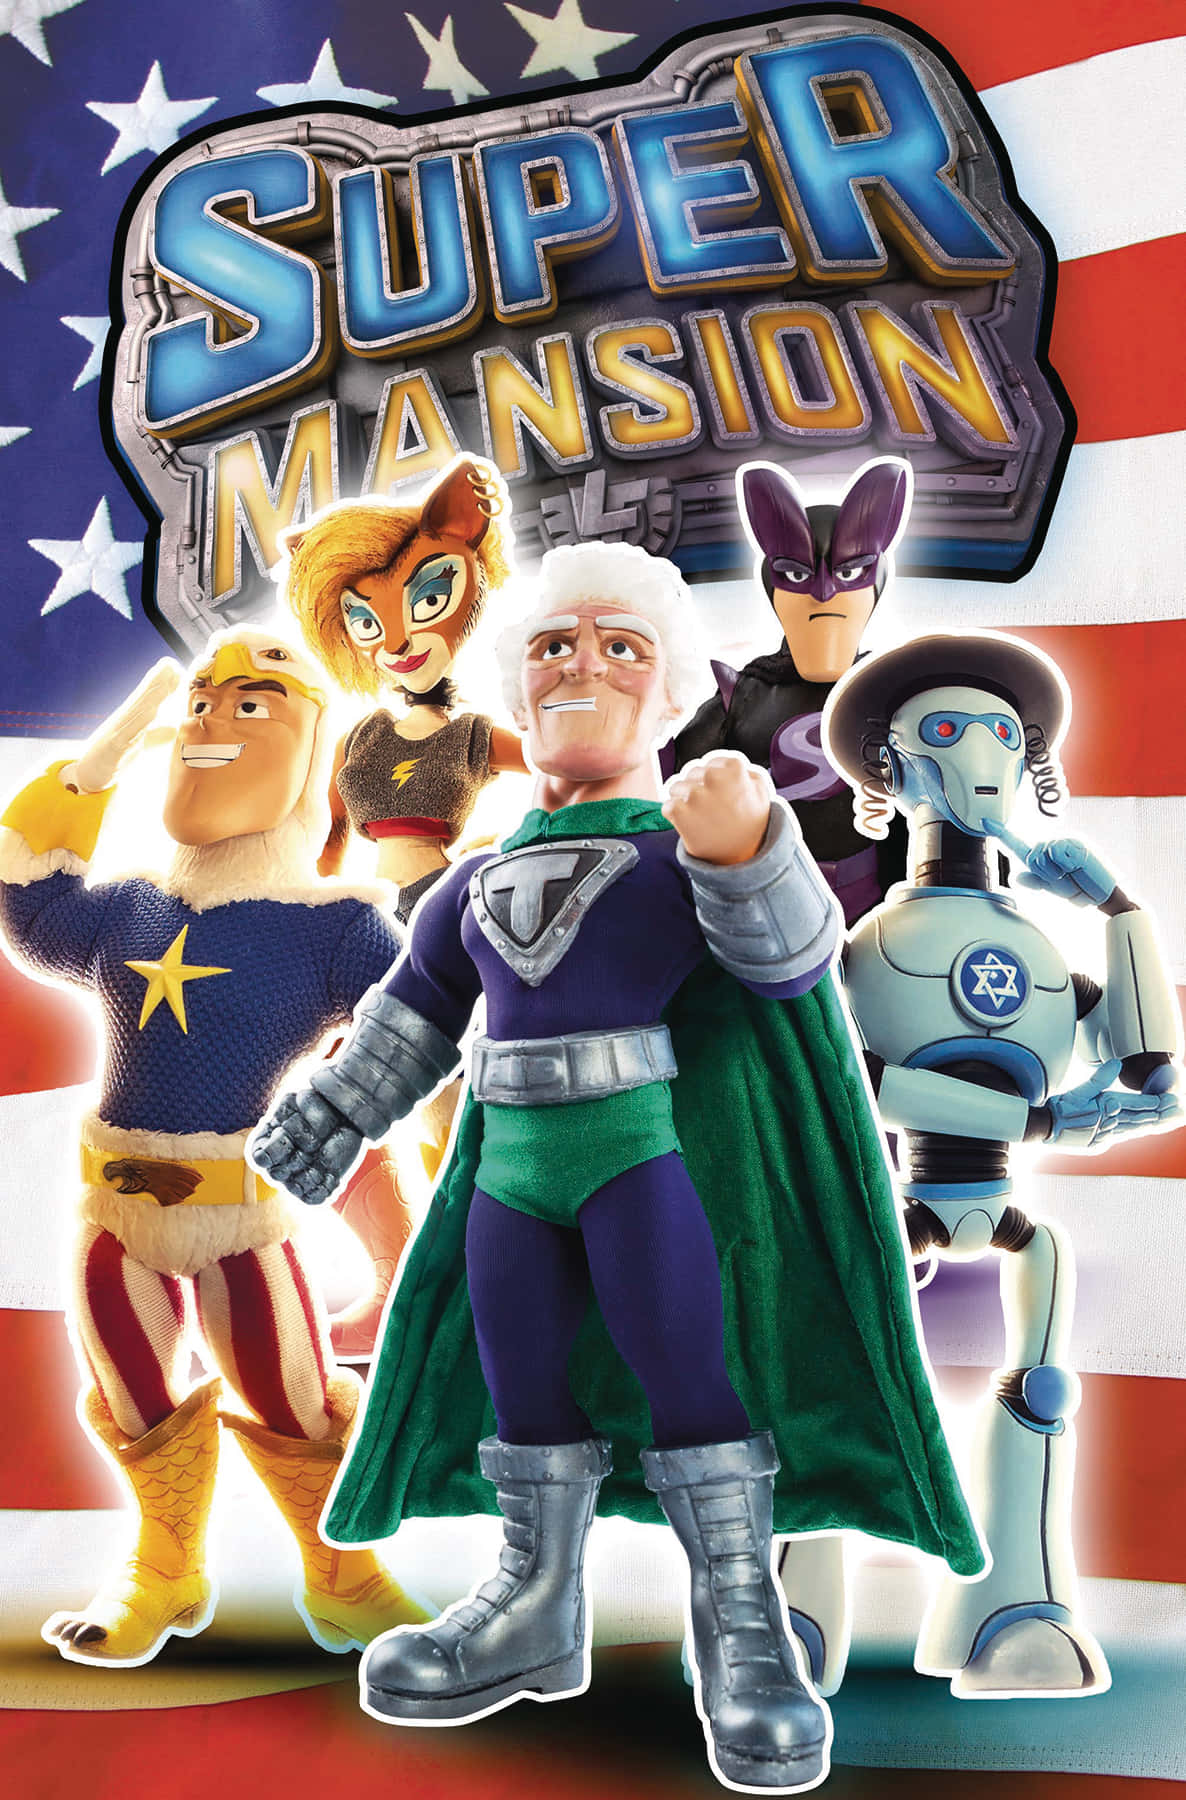 American Flag In Supermansion Poster Wallpaper